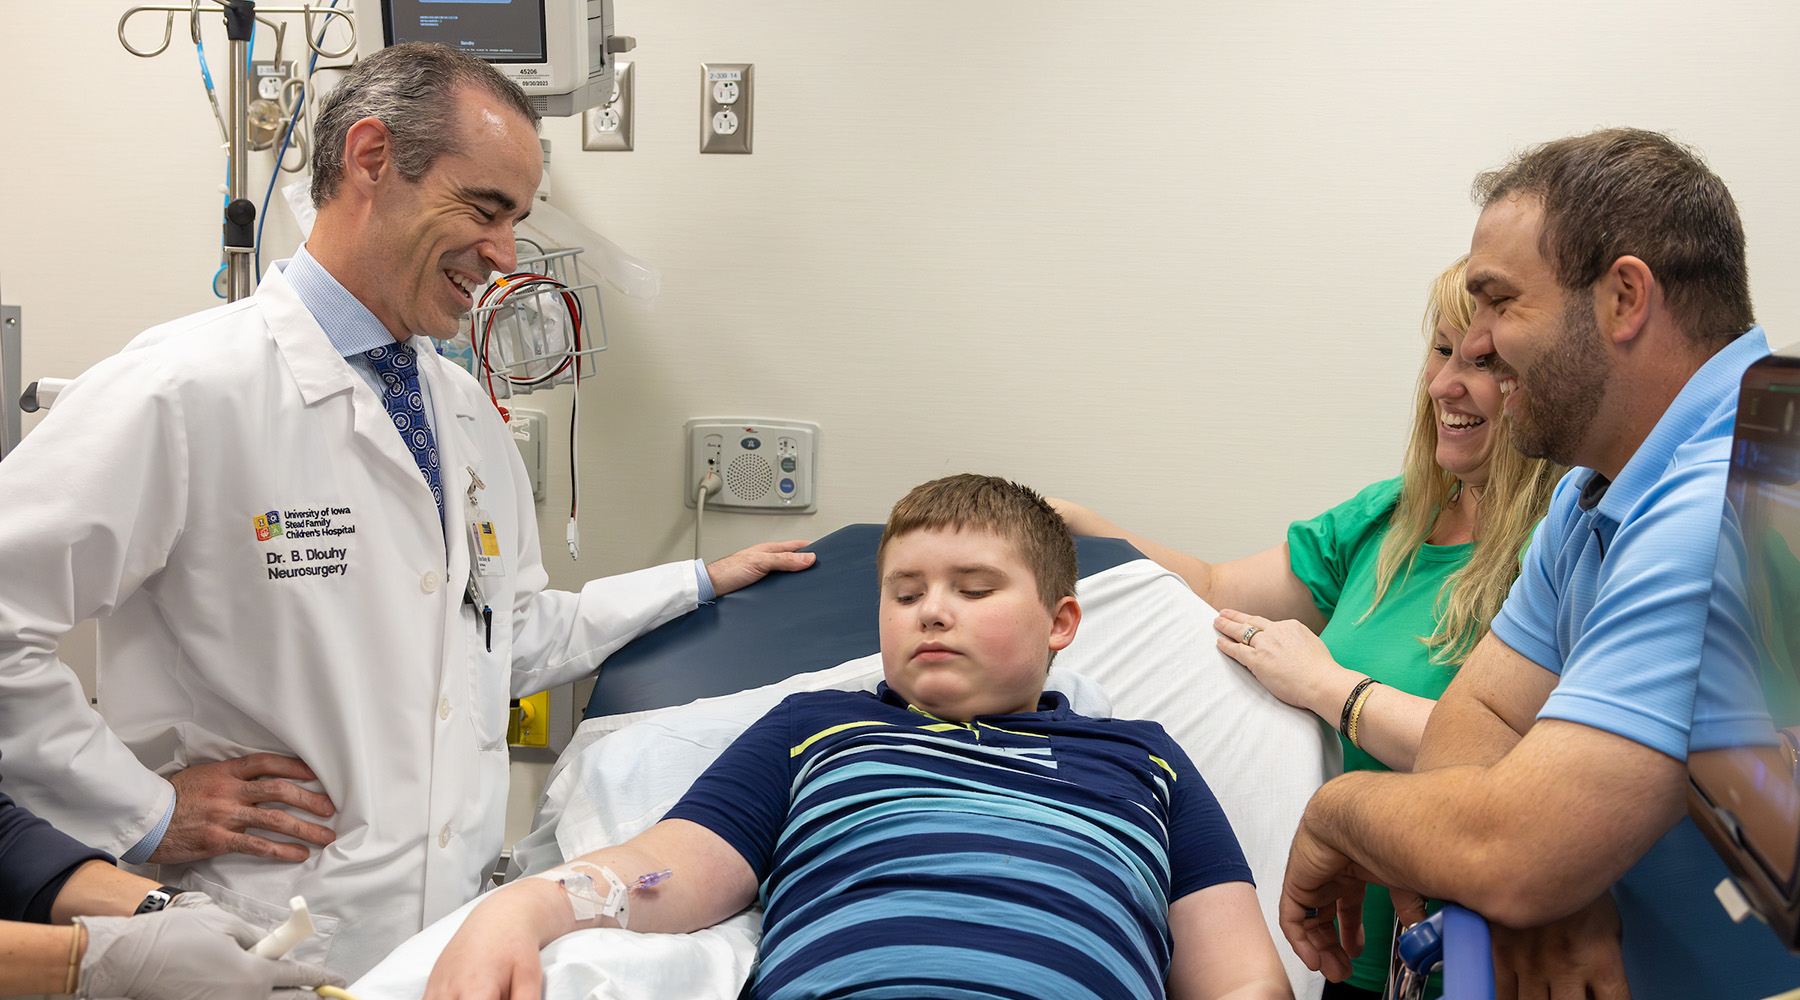 Brian Dlouhy, MD, speaks with Jana and Joe Lause during one of Liam's post-procedure visits 